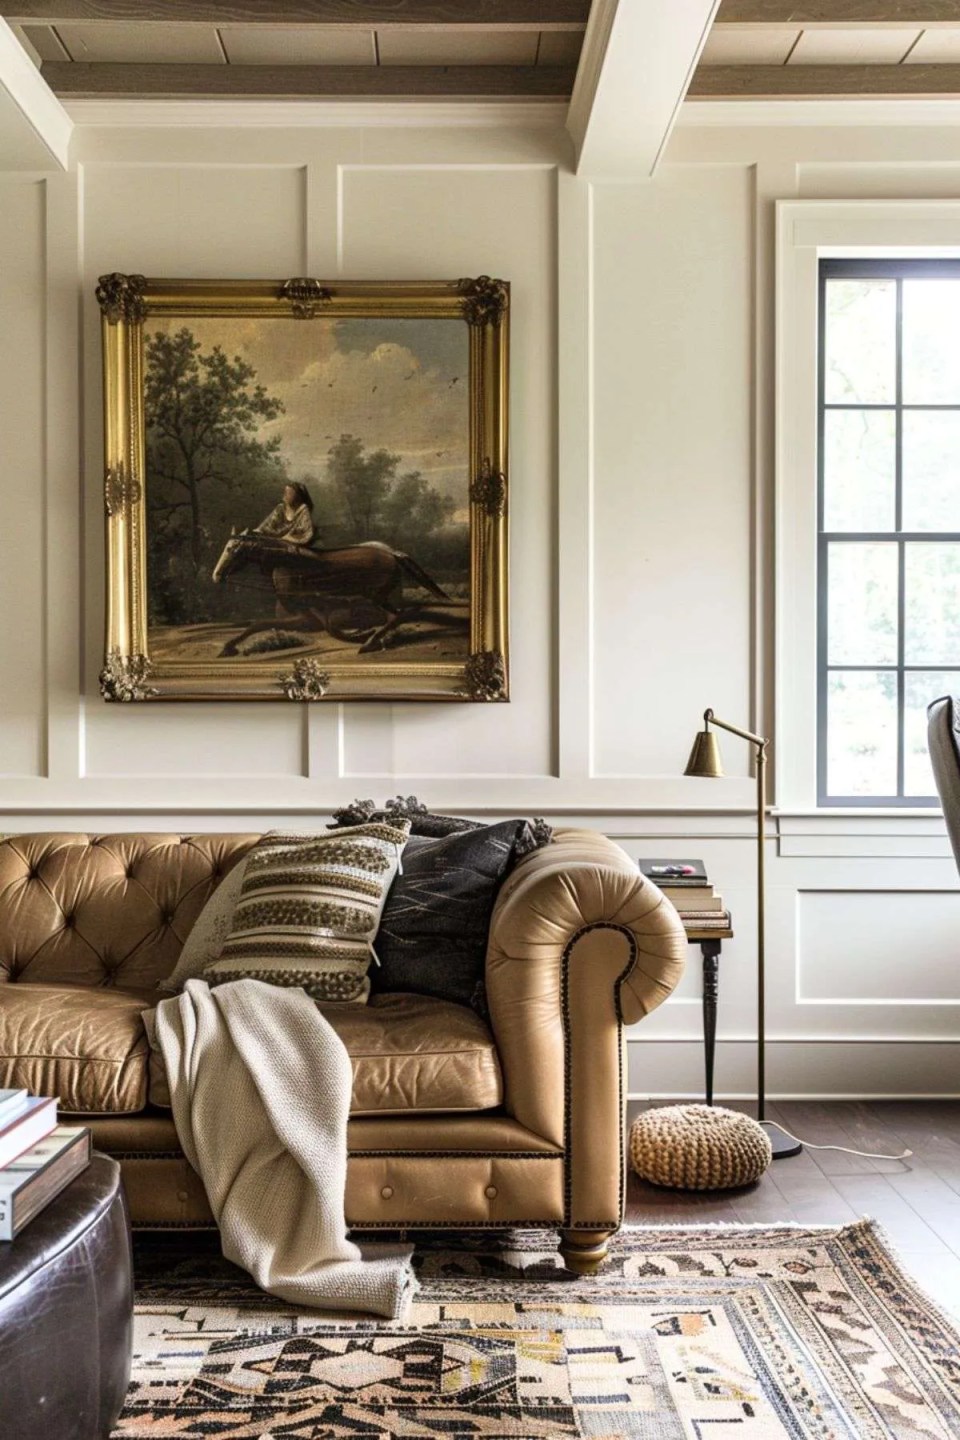 a leather chesterfield with vintage artwork framed in an ornate gold frame and wainscoting